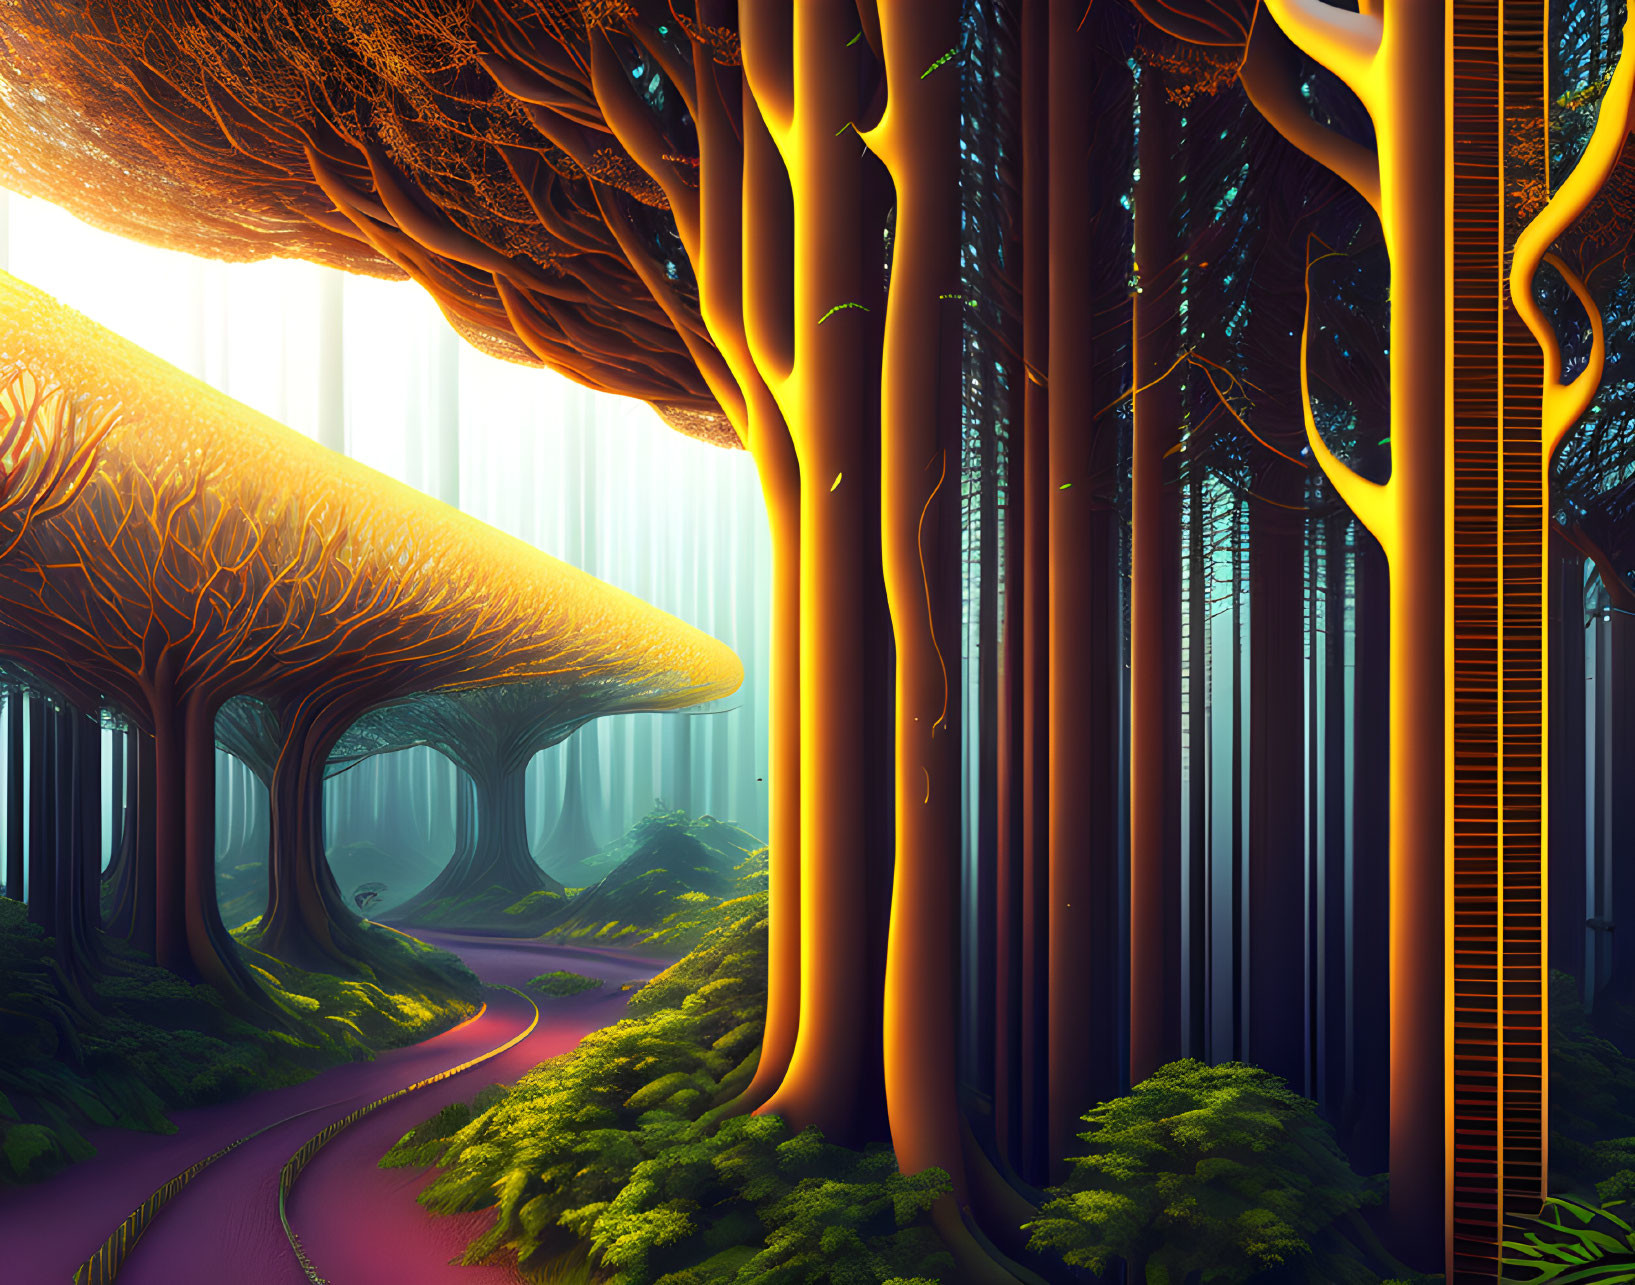 Lush Forest Landscape with Towering Trees and Golden Ladder